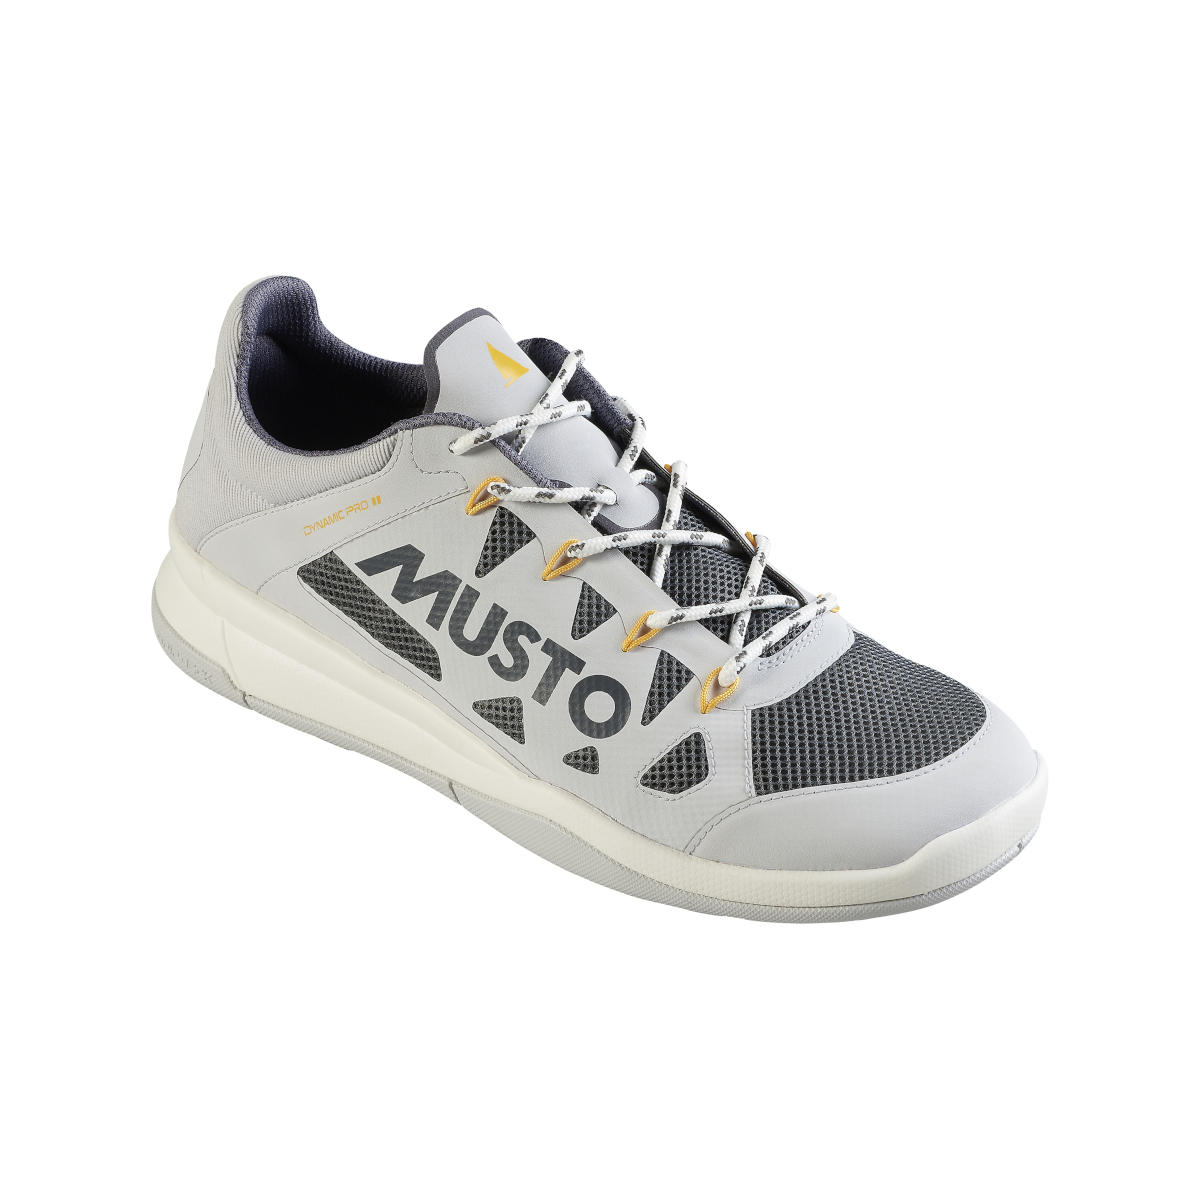 Musto Dynamic Pro II Adapt chaussures bateau homme gris clair / jaune, taille 43